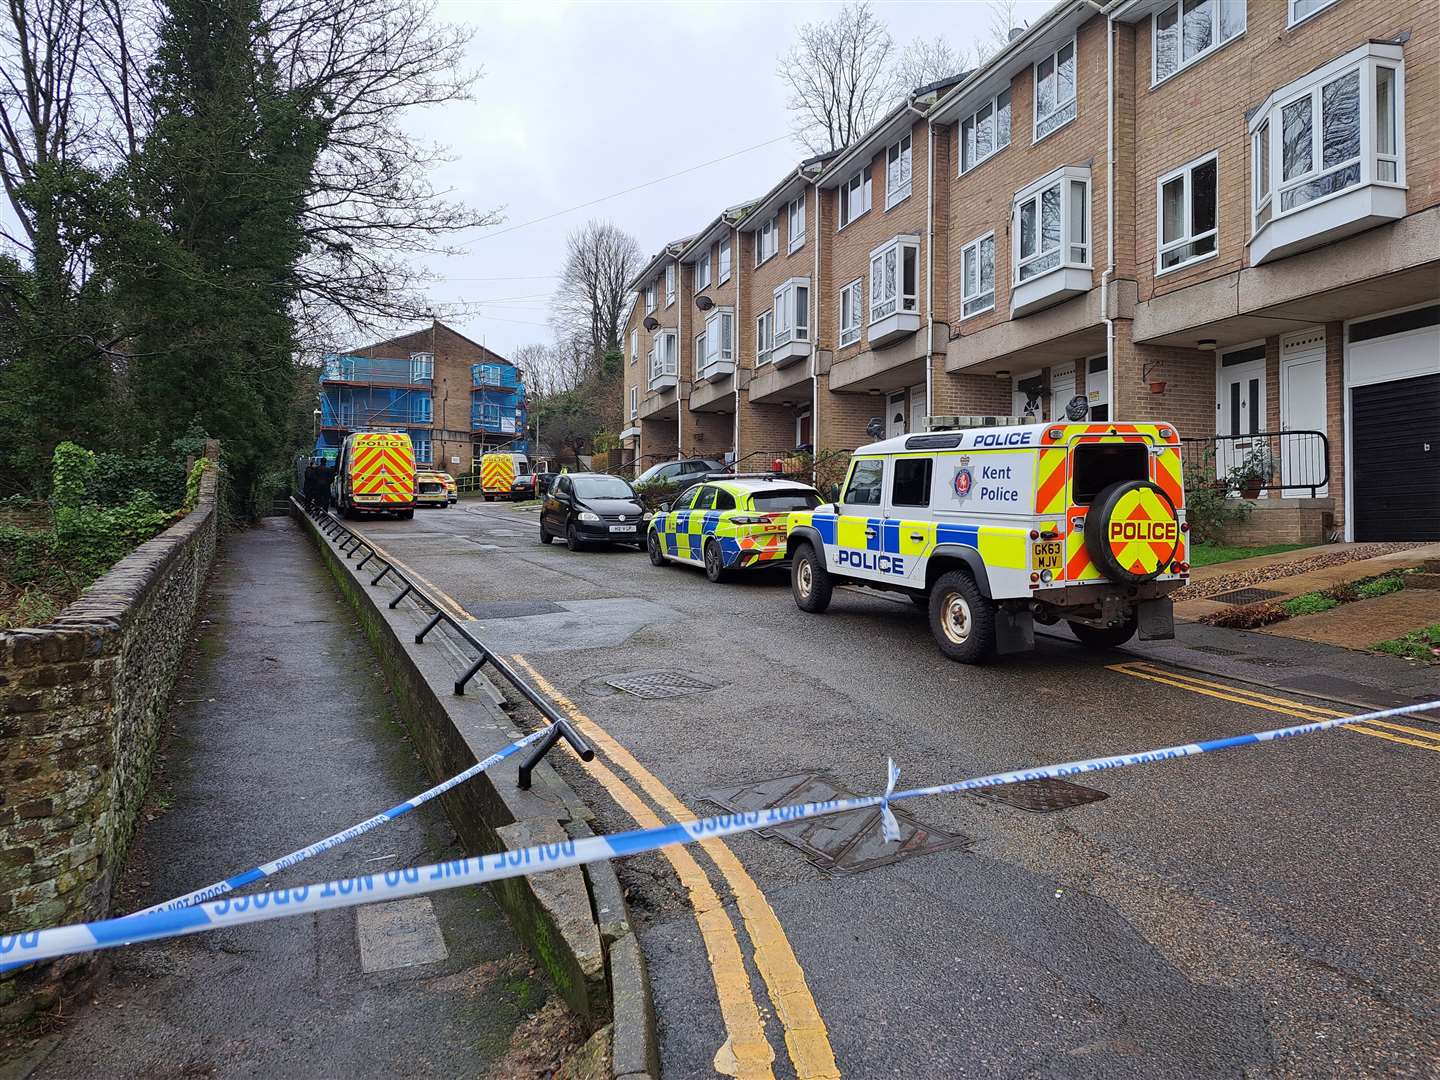 A heavy police presence in Anstee Road, Dover, lingered for days after the death of a 66-year-old